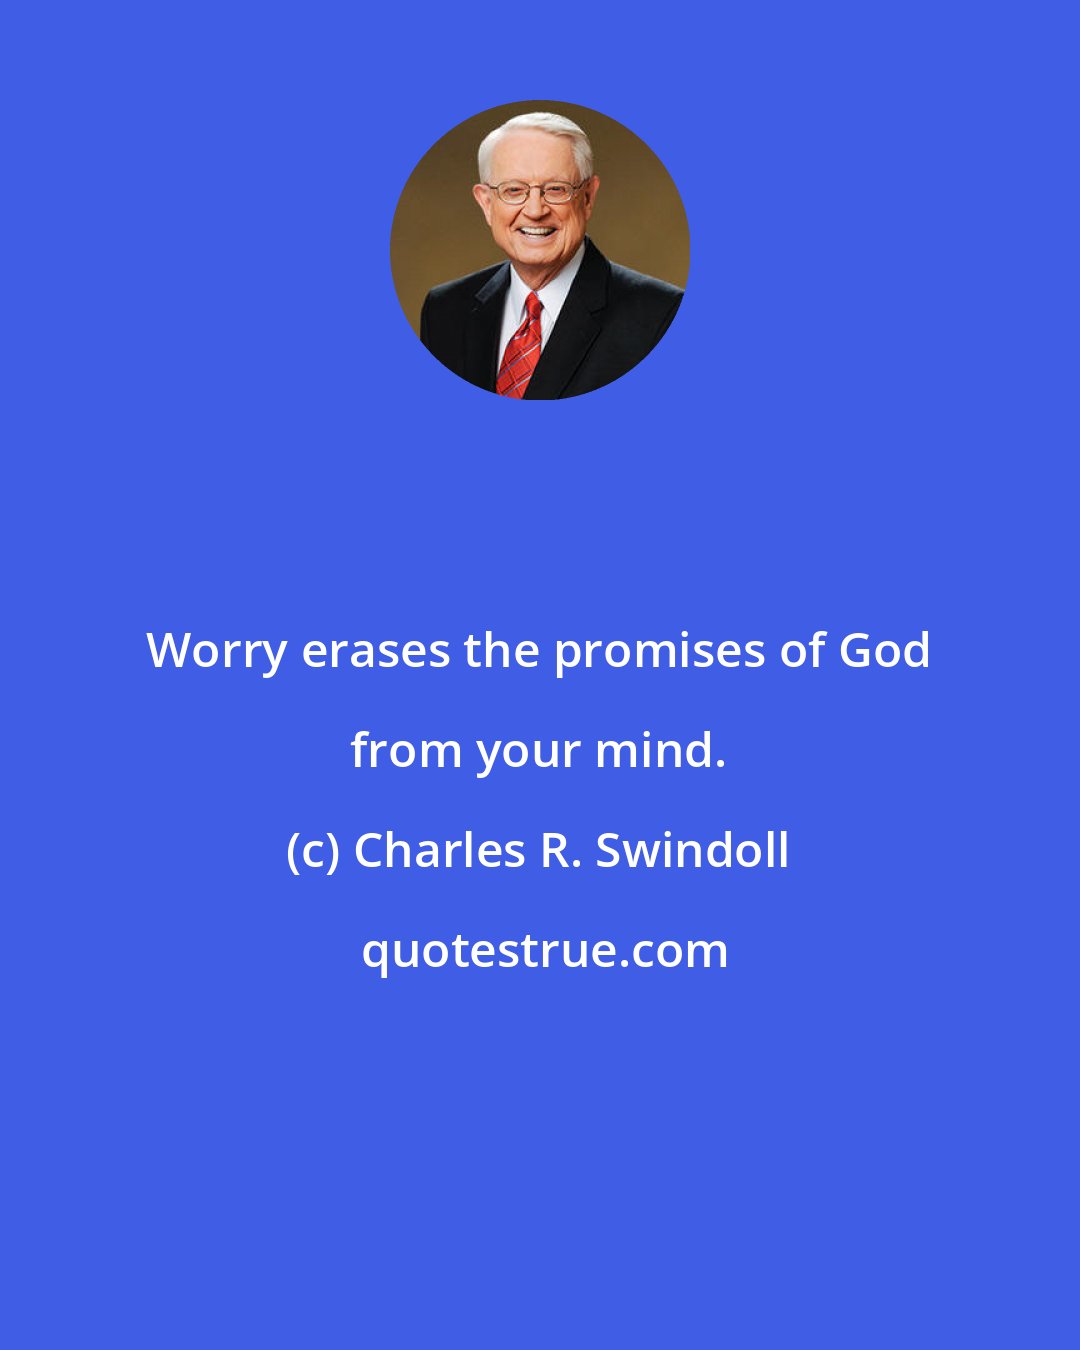 Charles R. Swindoll: Worry erases the promises of God from your mind.